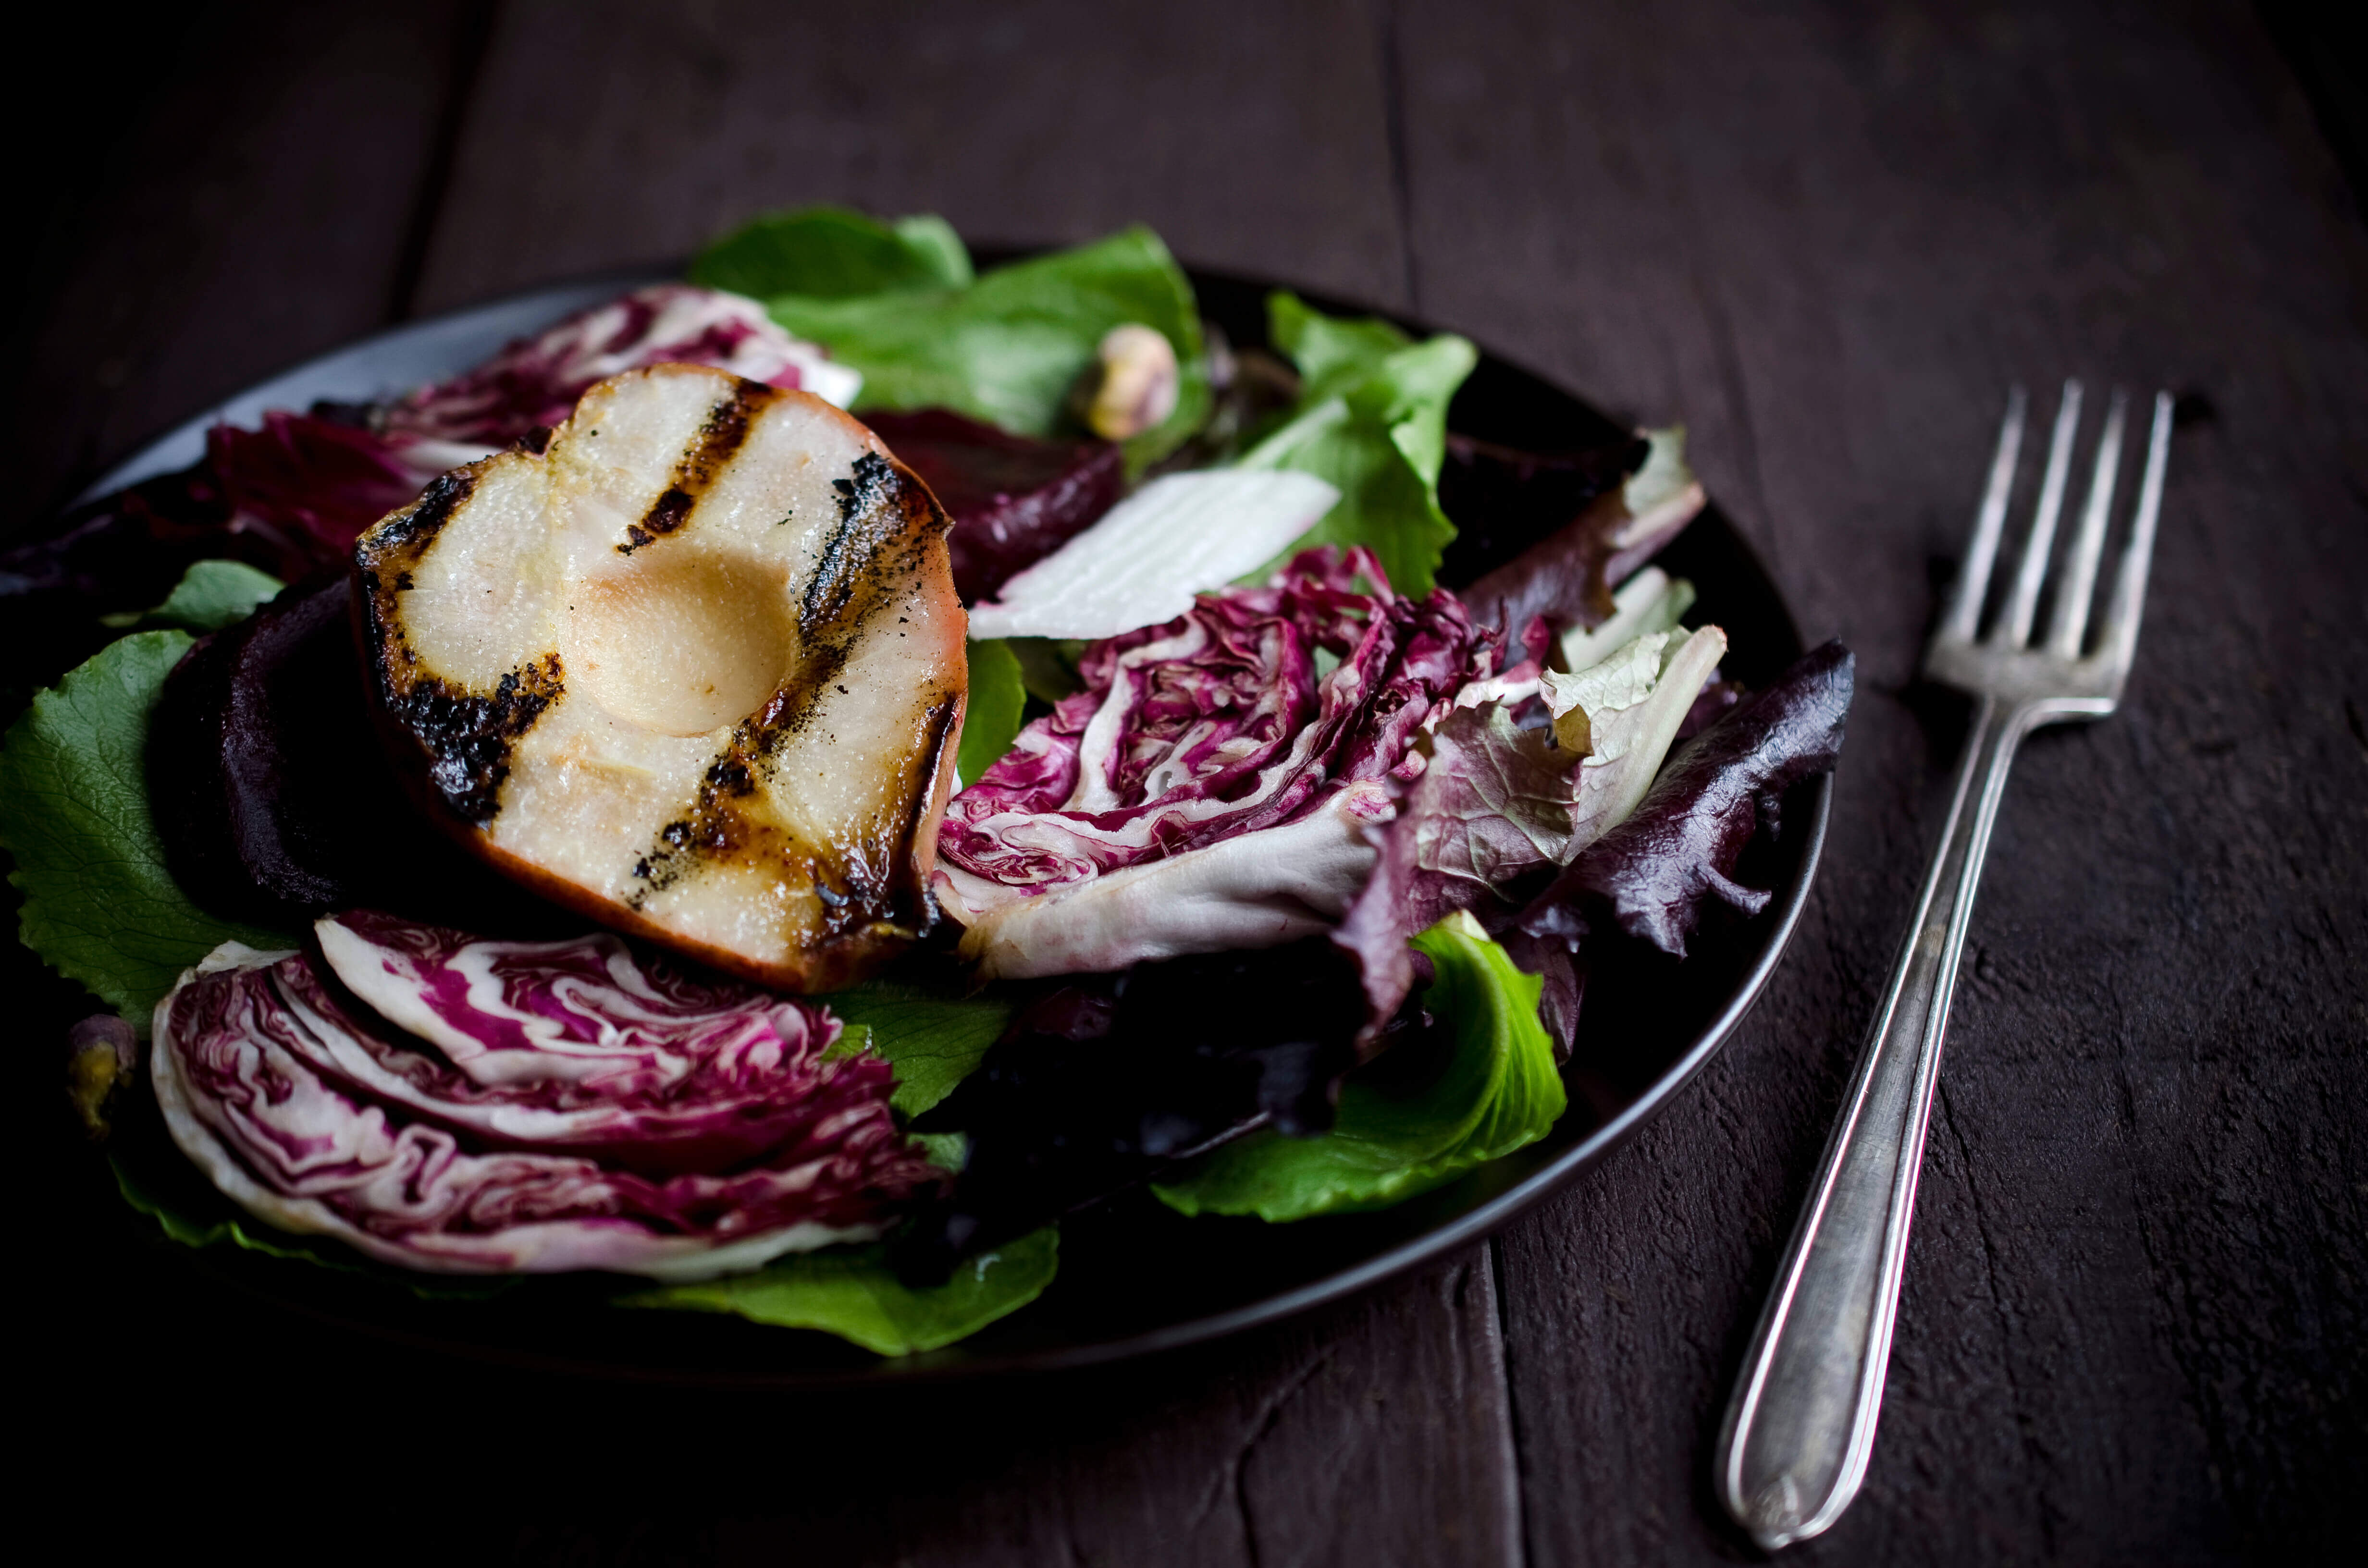 Grilled Pear and Radicchio Salad